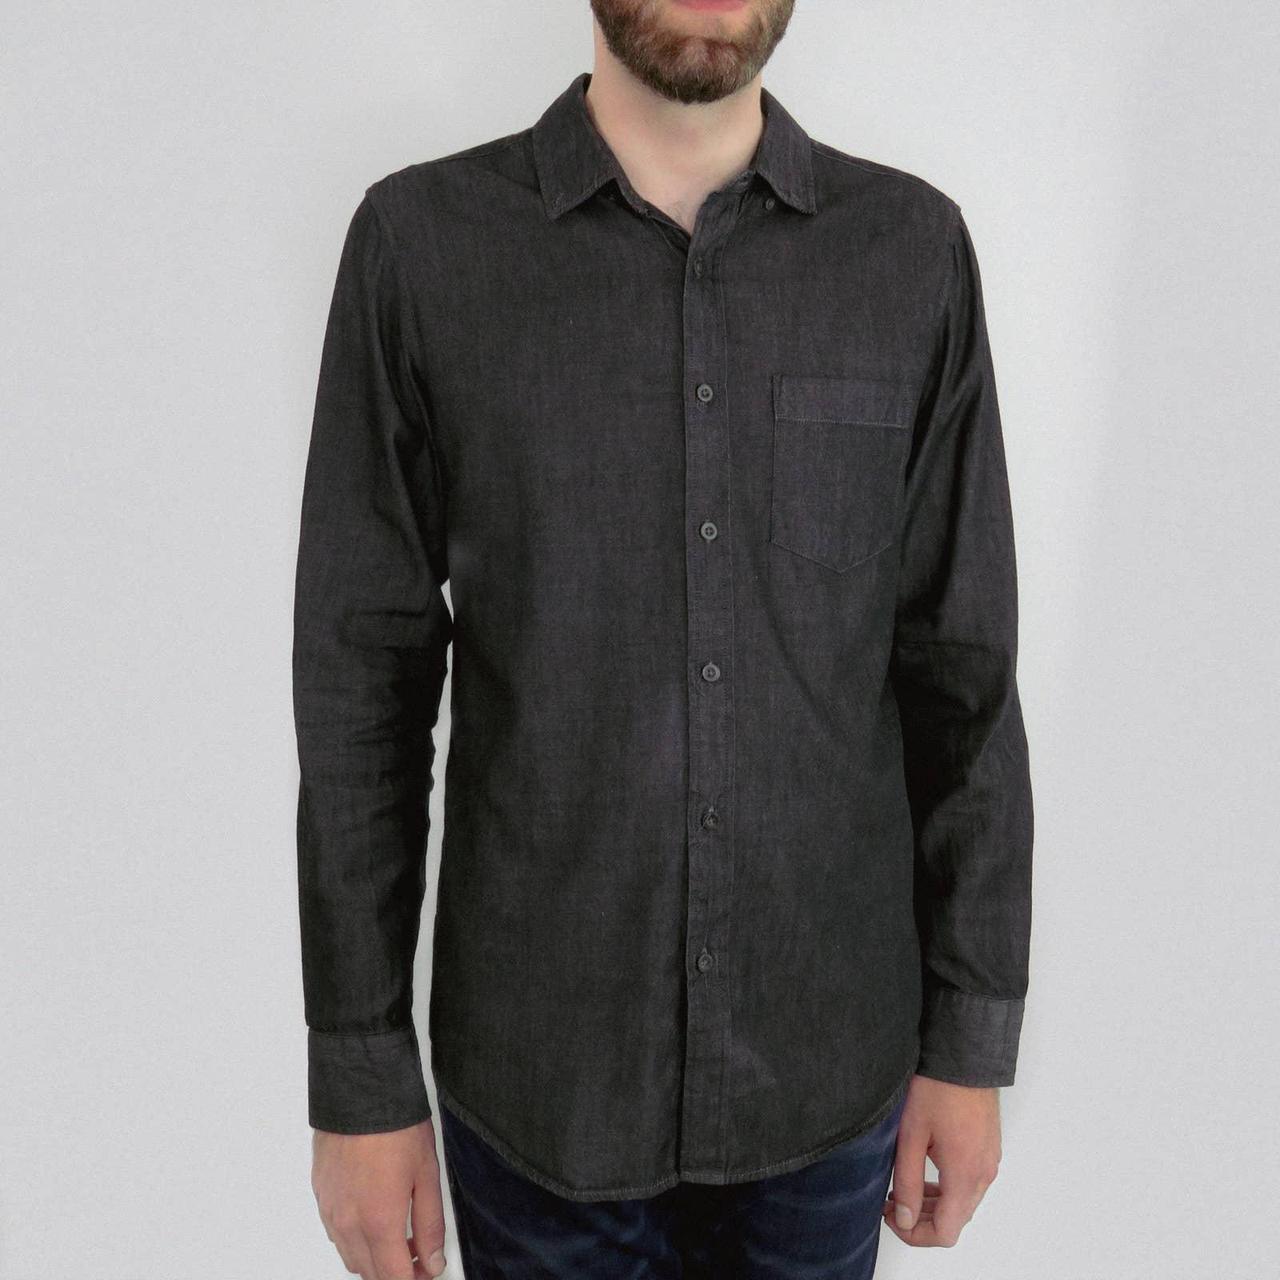 Product Image 1 - Forever 21 Men Charcoal Gray